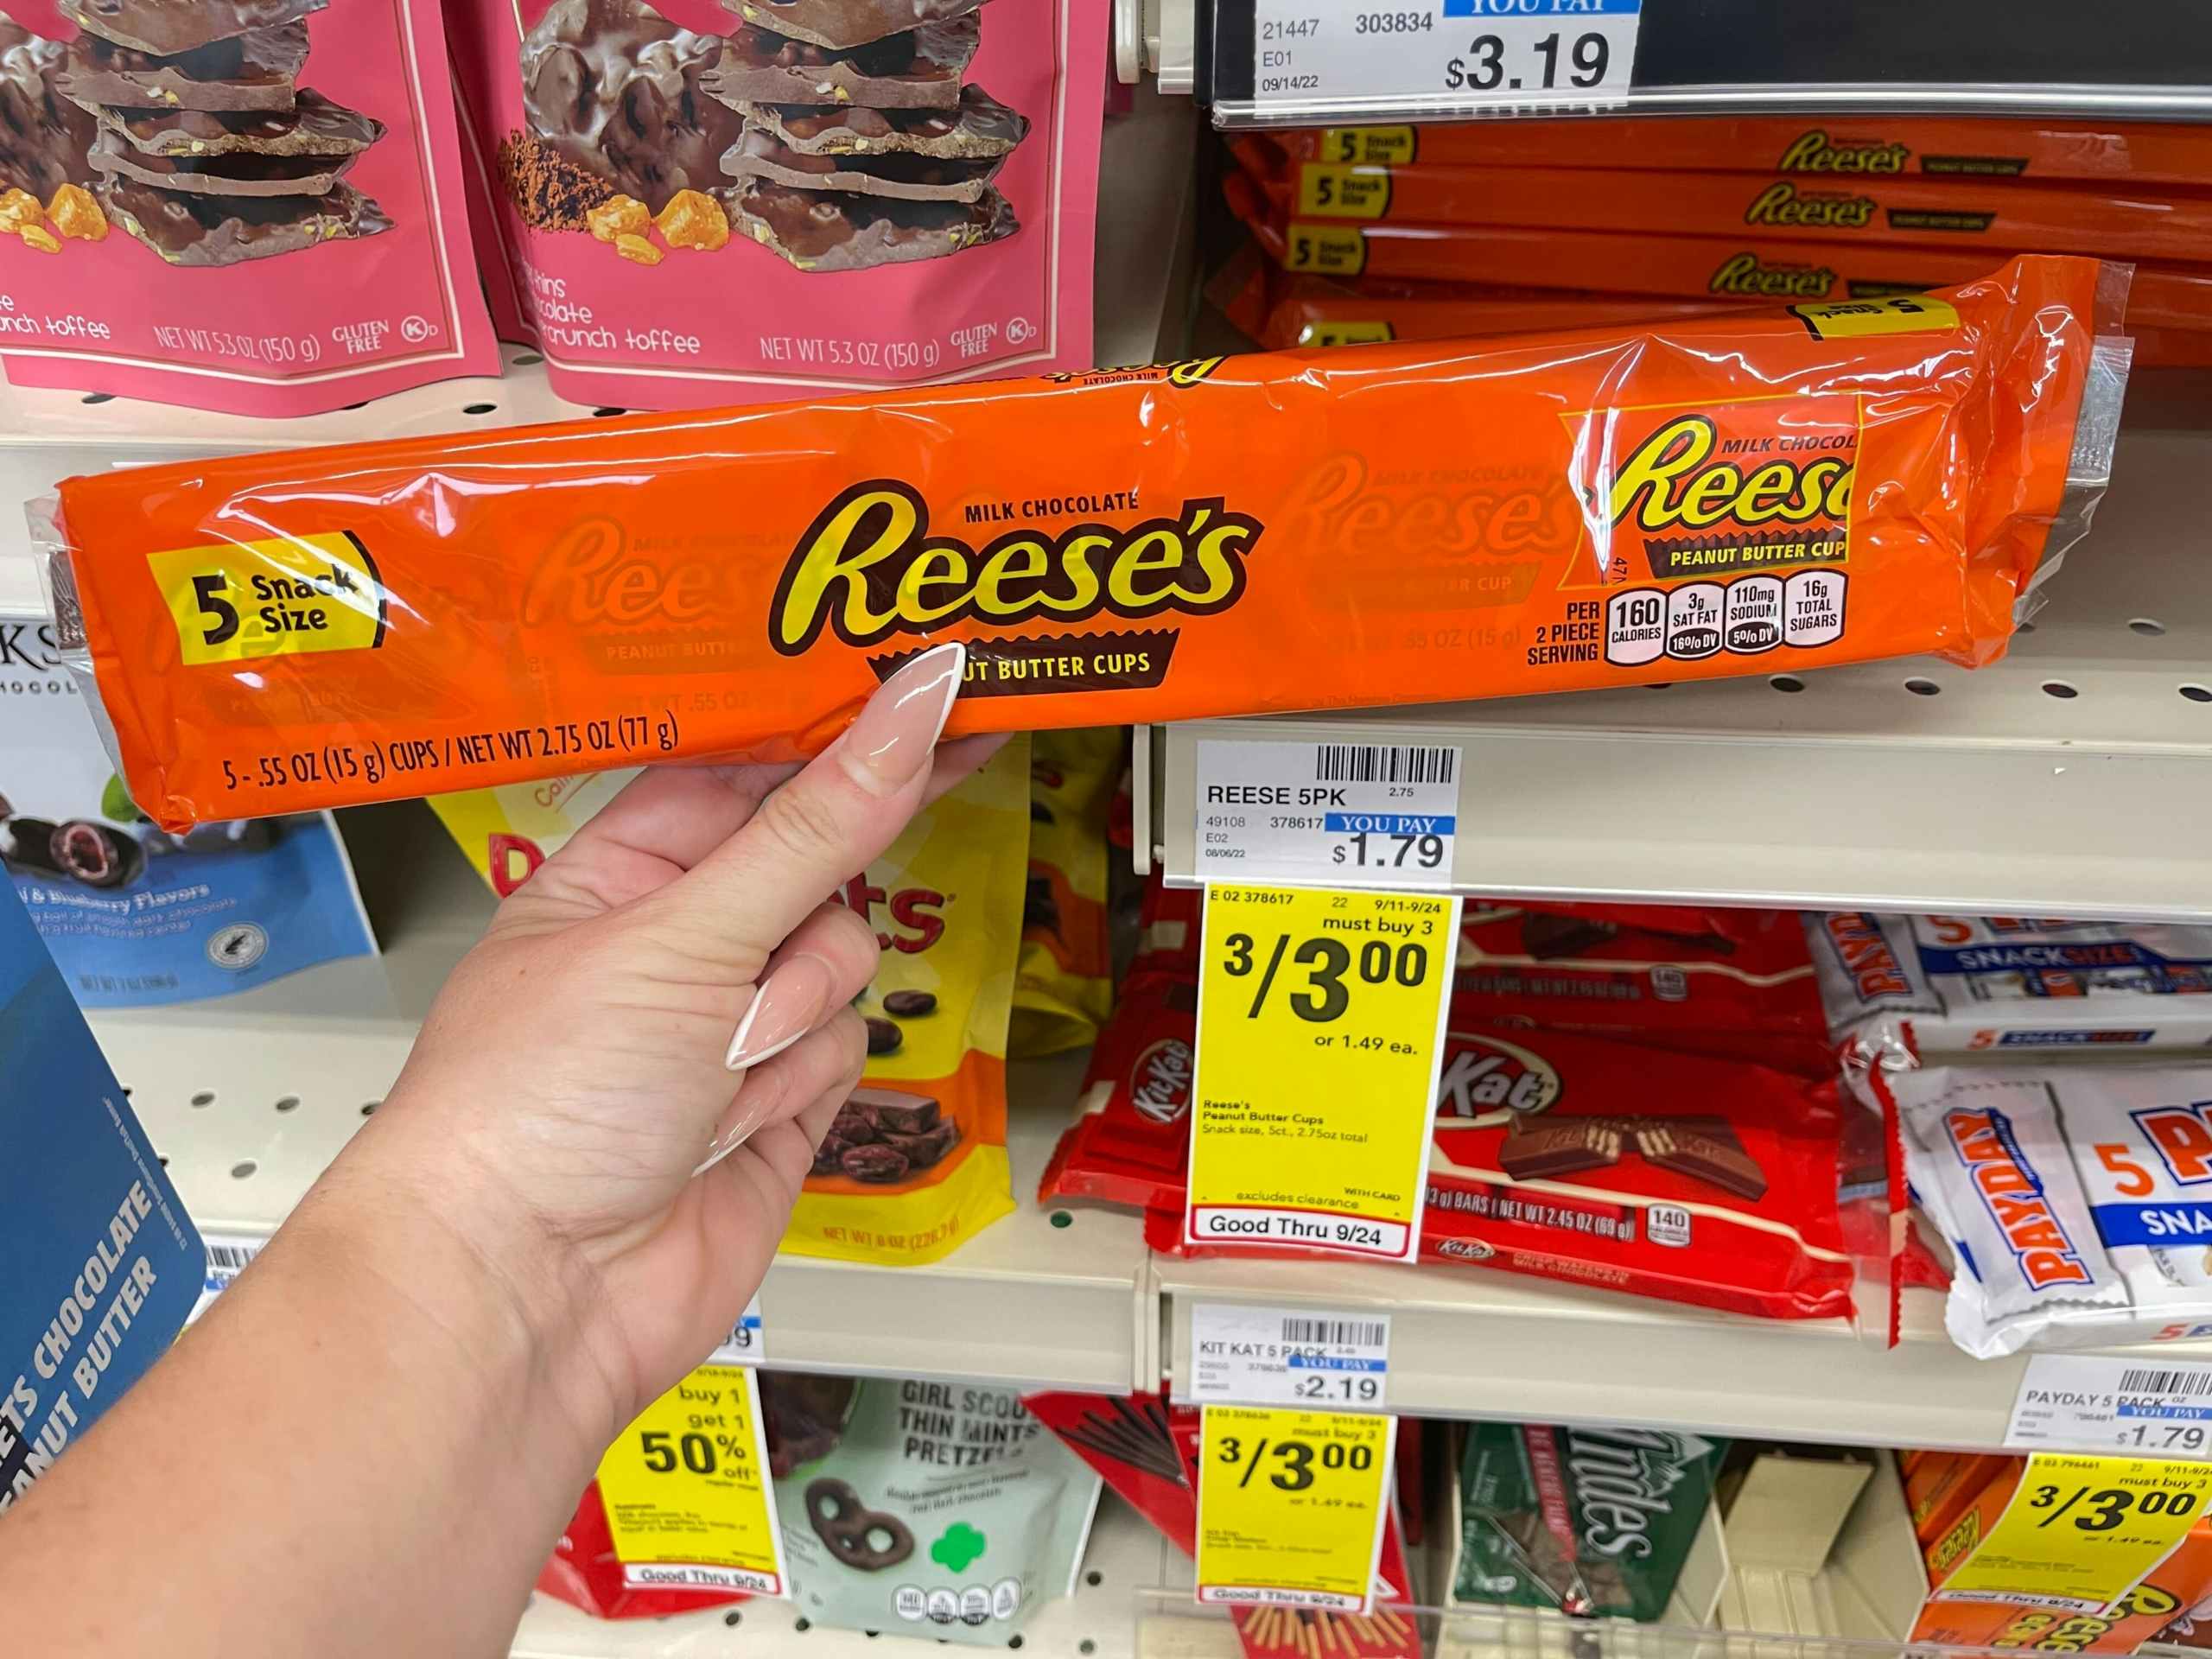 reeses snack size candy bars next to 3 for $3 cvs sales tag